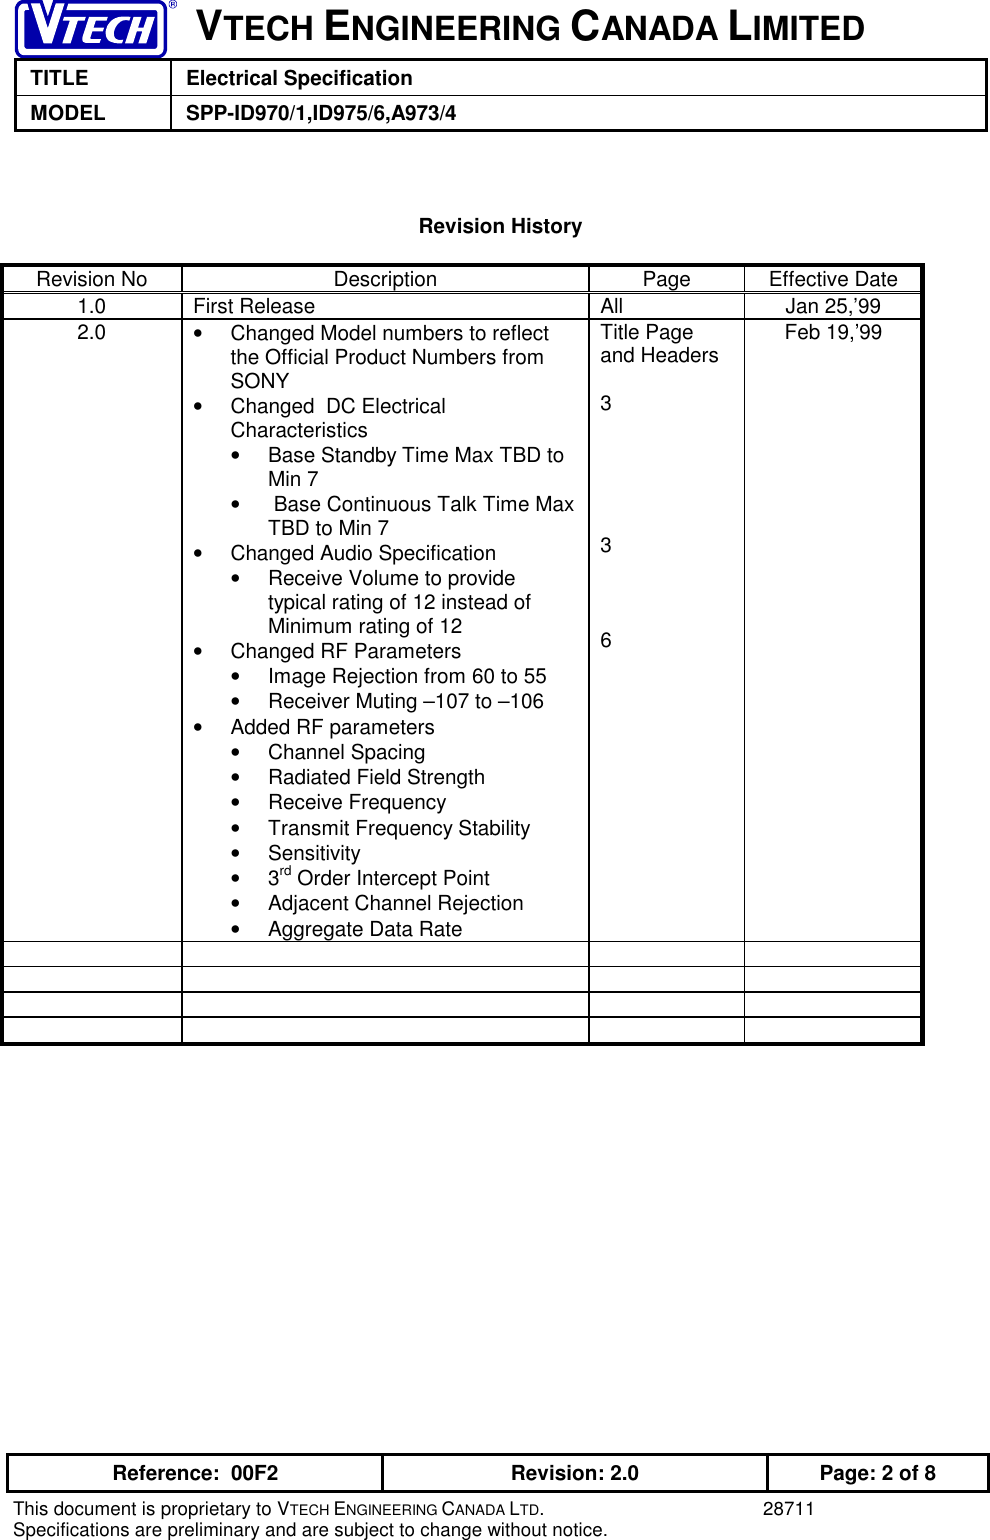 VTECH ENGINEERING CANADA LIMITEDTITLE Electrical SpecificationMODEL SPP-ID970/1,ID975/6,A973/4Reference:  00F2 Revision: 2.0 Page: 2 of 8This document is proprietary to VTECH ENGINEERING CANADA LTD. 28711Specifications are preliminary and are subject to change without notice.Revision HistoryRevision No Description Page Effective Date1.0 First Release All Jan 25,’992.0 •  Changed Model numbers to reflectthe Official Product Numbers fromSONY•  Changed  DC ElectricalCharacteristics•  Base Standby Time Max TBD toMin 7•   Base Continuous Talk Time MaxTBD to Min 7•  Changed Audio Specification•  Receive Volume to providetypical rating of 12 instead ofMinimum rating of 12•  Changed RF Parameters•  Image Rejection from 60 to 55•  Receiver Muting –107 to –106•  Added RF parameters• Channel Spacing•  Radiated Field Strength• Receive Frequency•  Transmit Frequency Stability• Sensitivity• 3rd Order Intercept Point•  Adjacent Channel Rejection•  Aggregate Data RateTitle Pageand Headers336Feb 19,’99